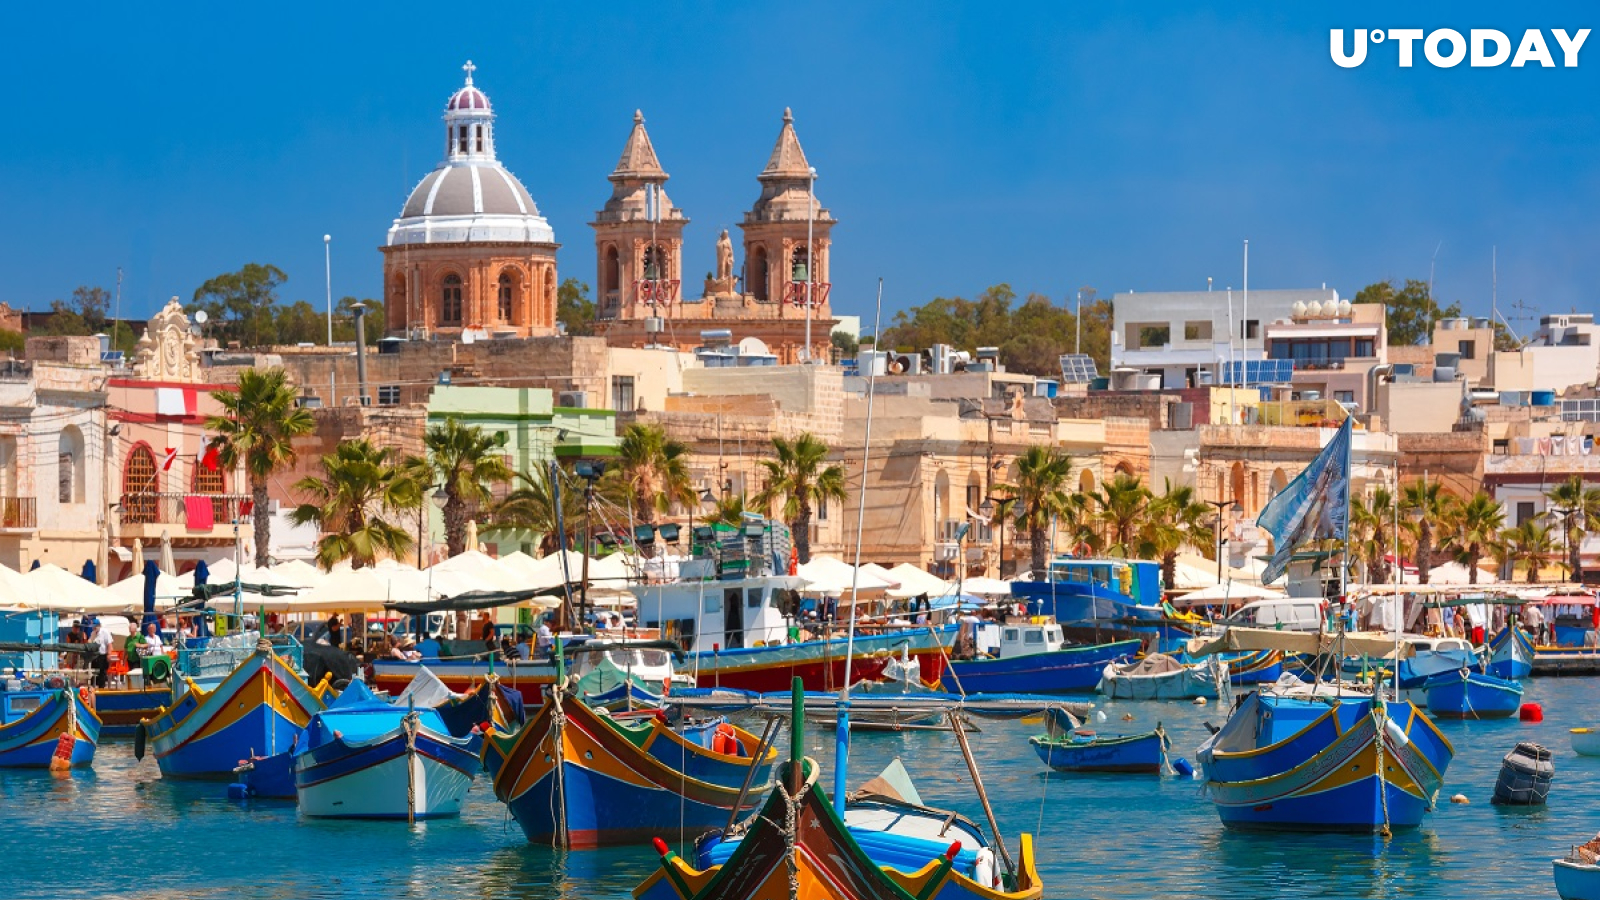 70 Percent of Malta's Crypto Startups Go Belly-Up